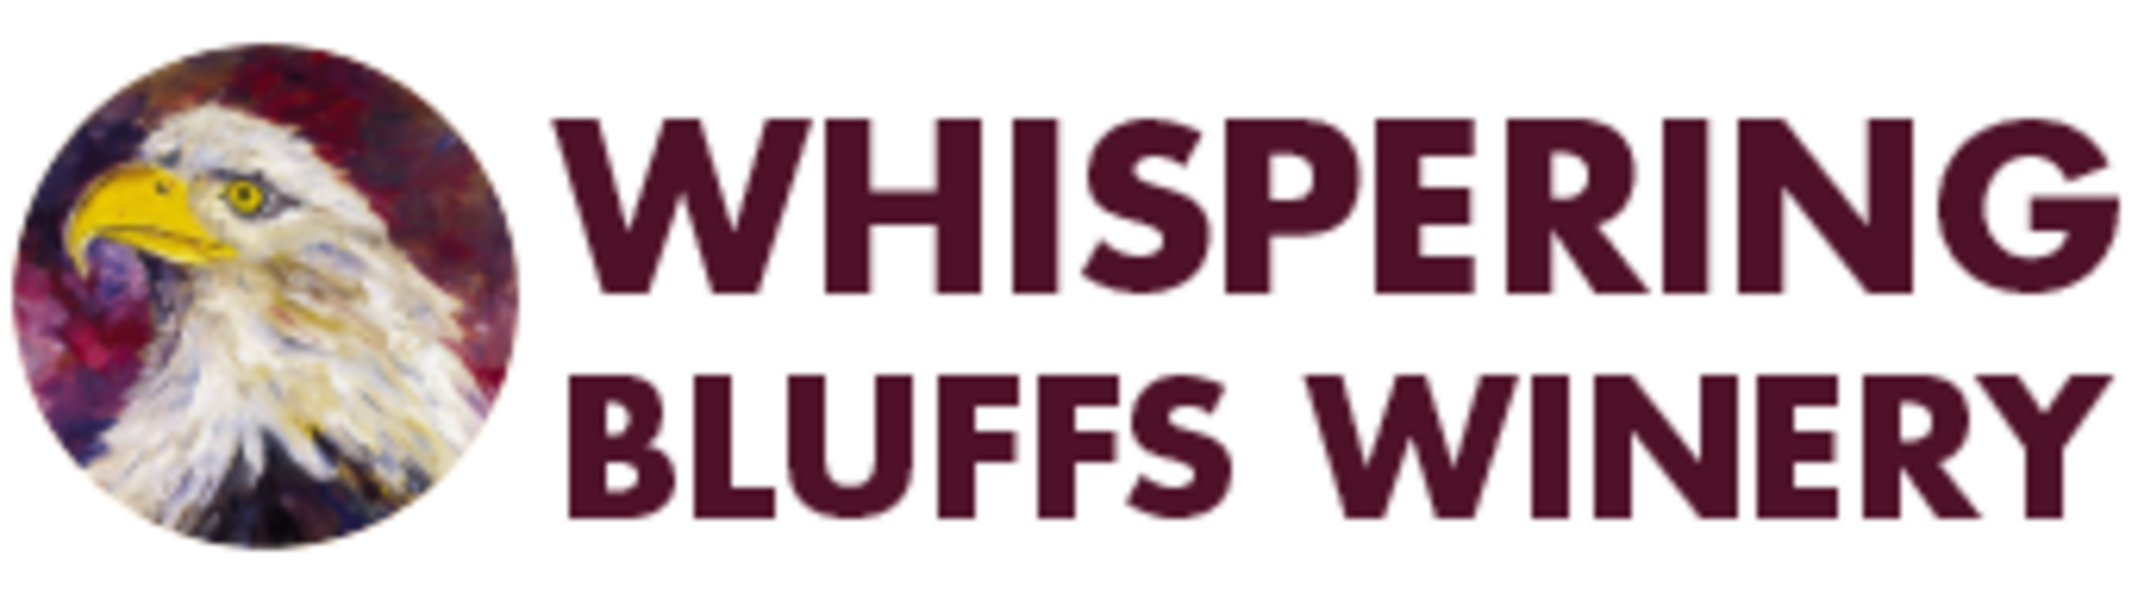 Logo for Whispering Bluff Winery